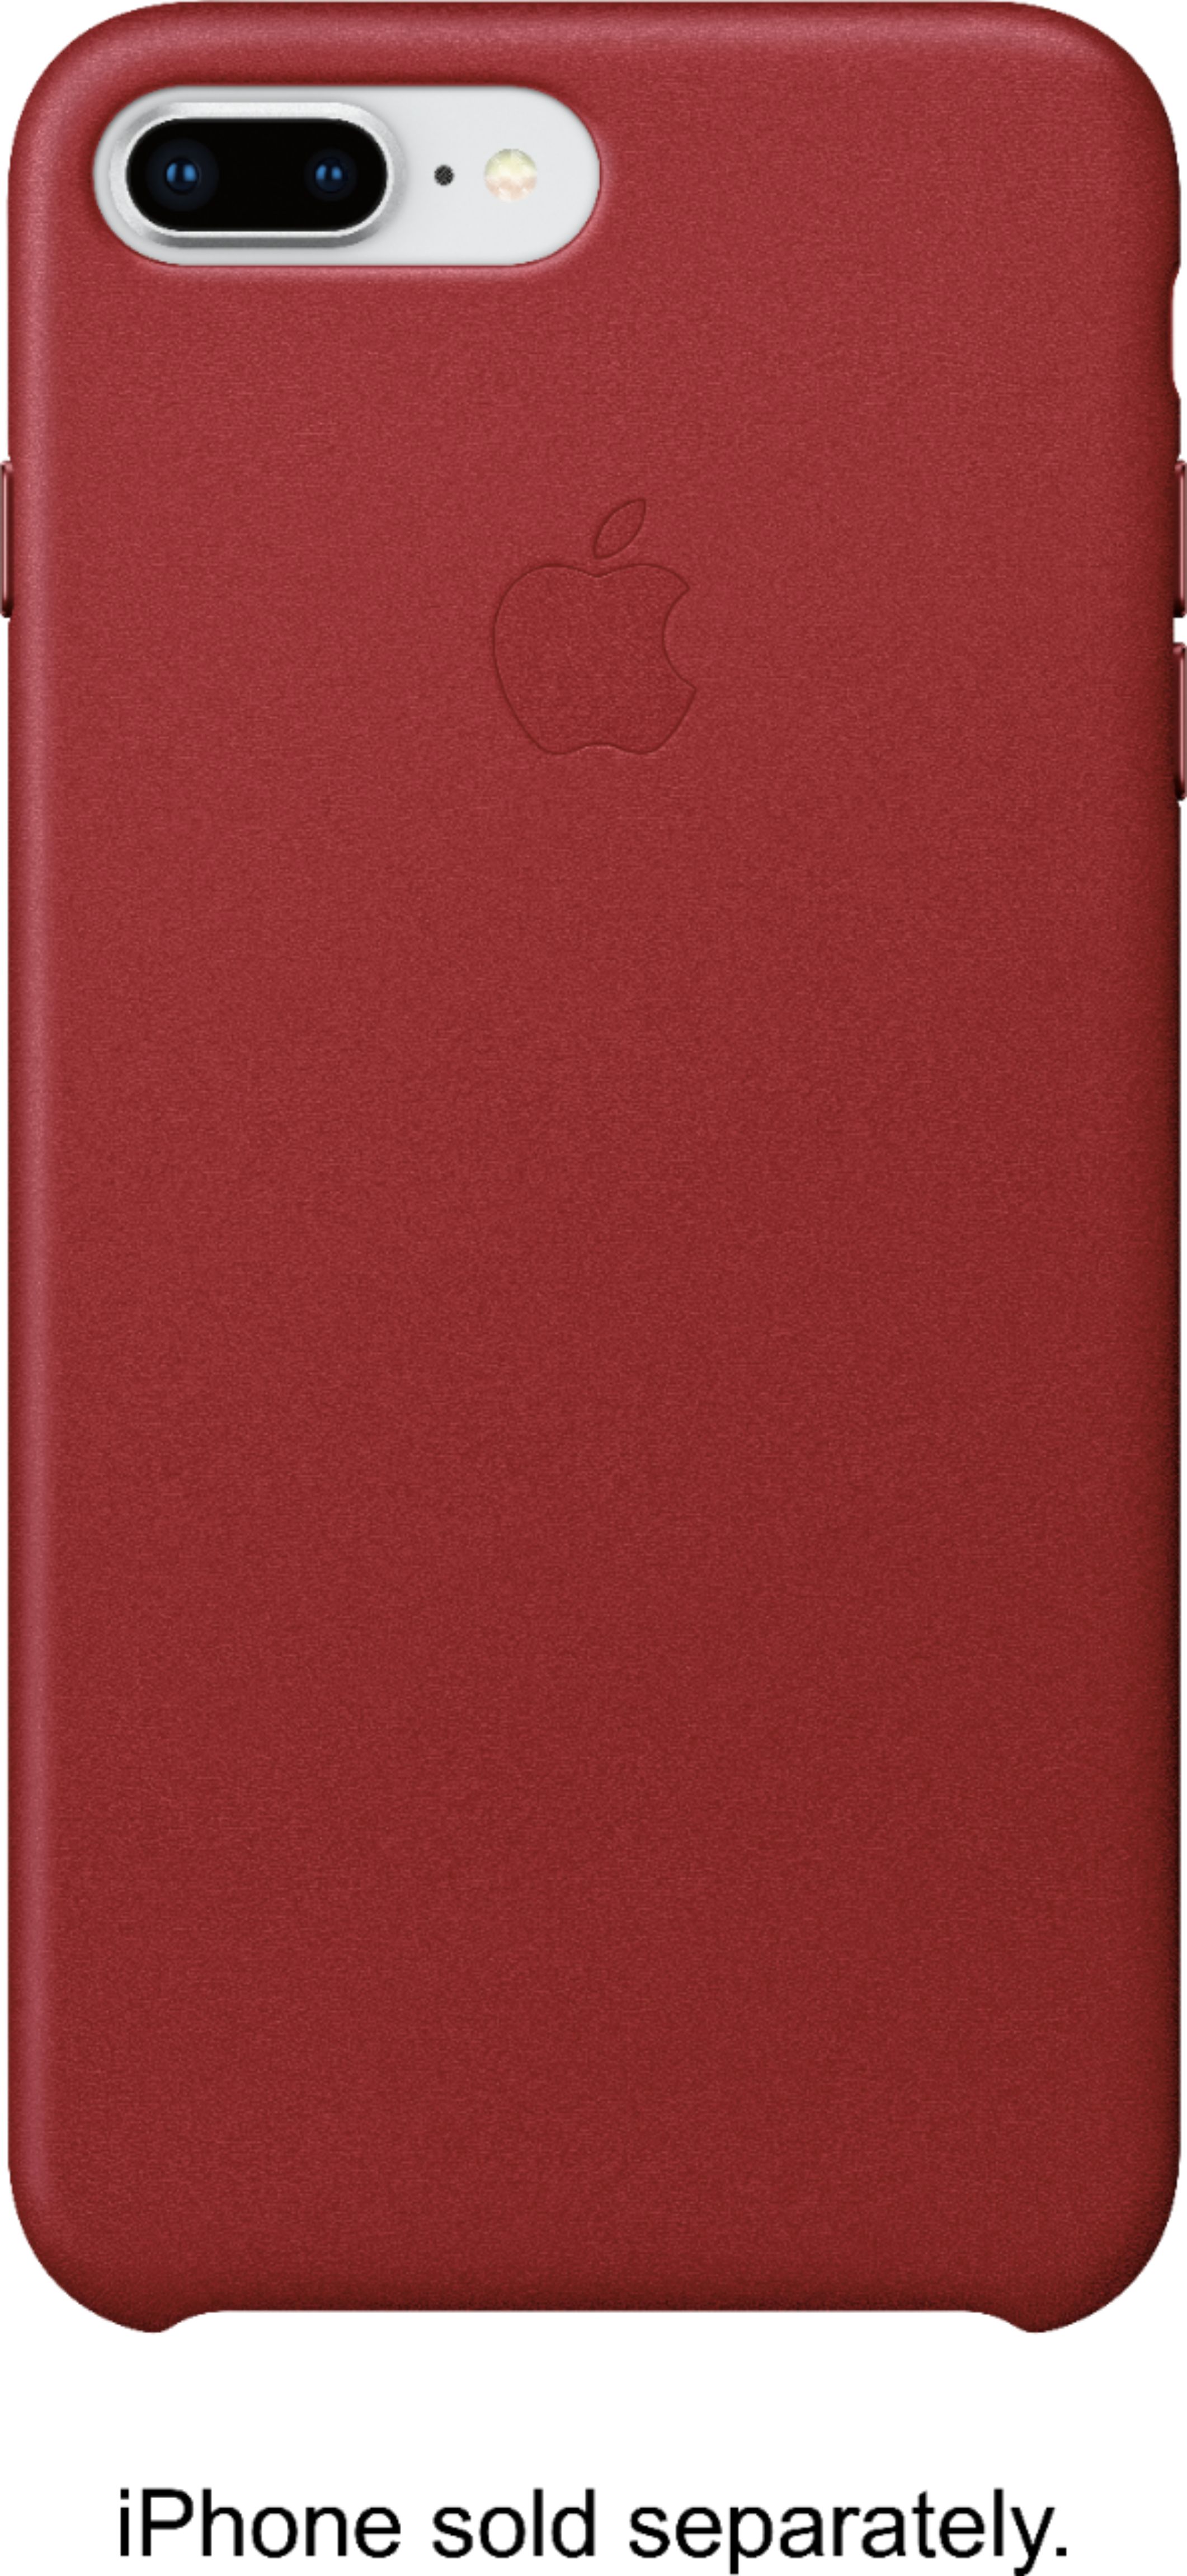 Apple Iphone 8 Plus 7 Plus Leather Case Product Red Mqhn2zm A Best Buy